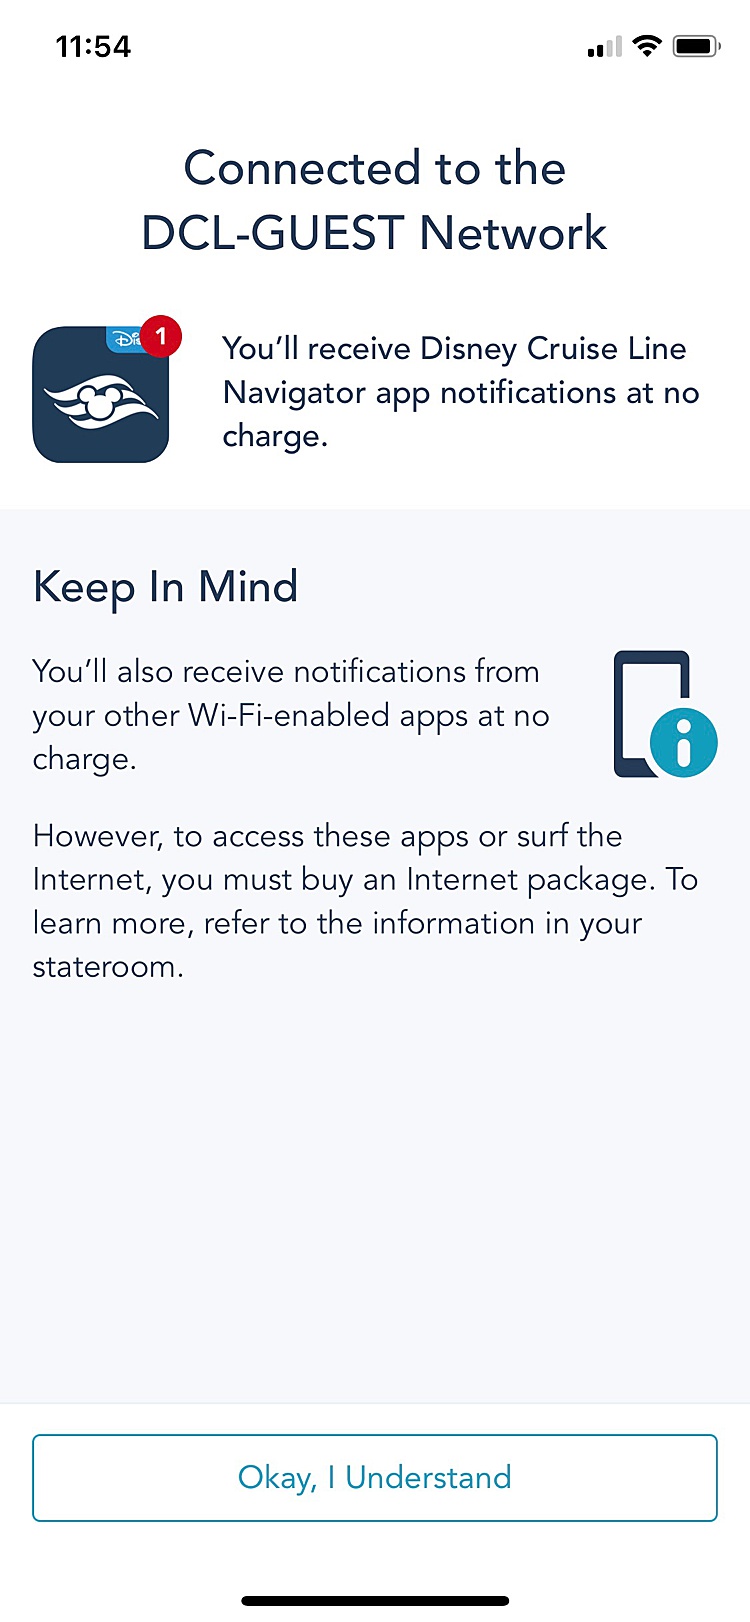 Screenshot of the Disney Cruise Line Navigator app in-app Wi-Fi connection.